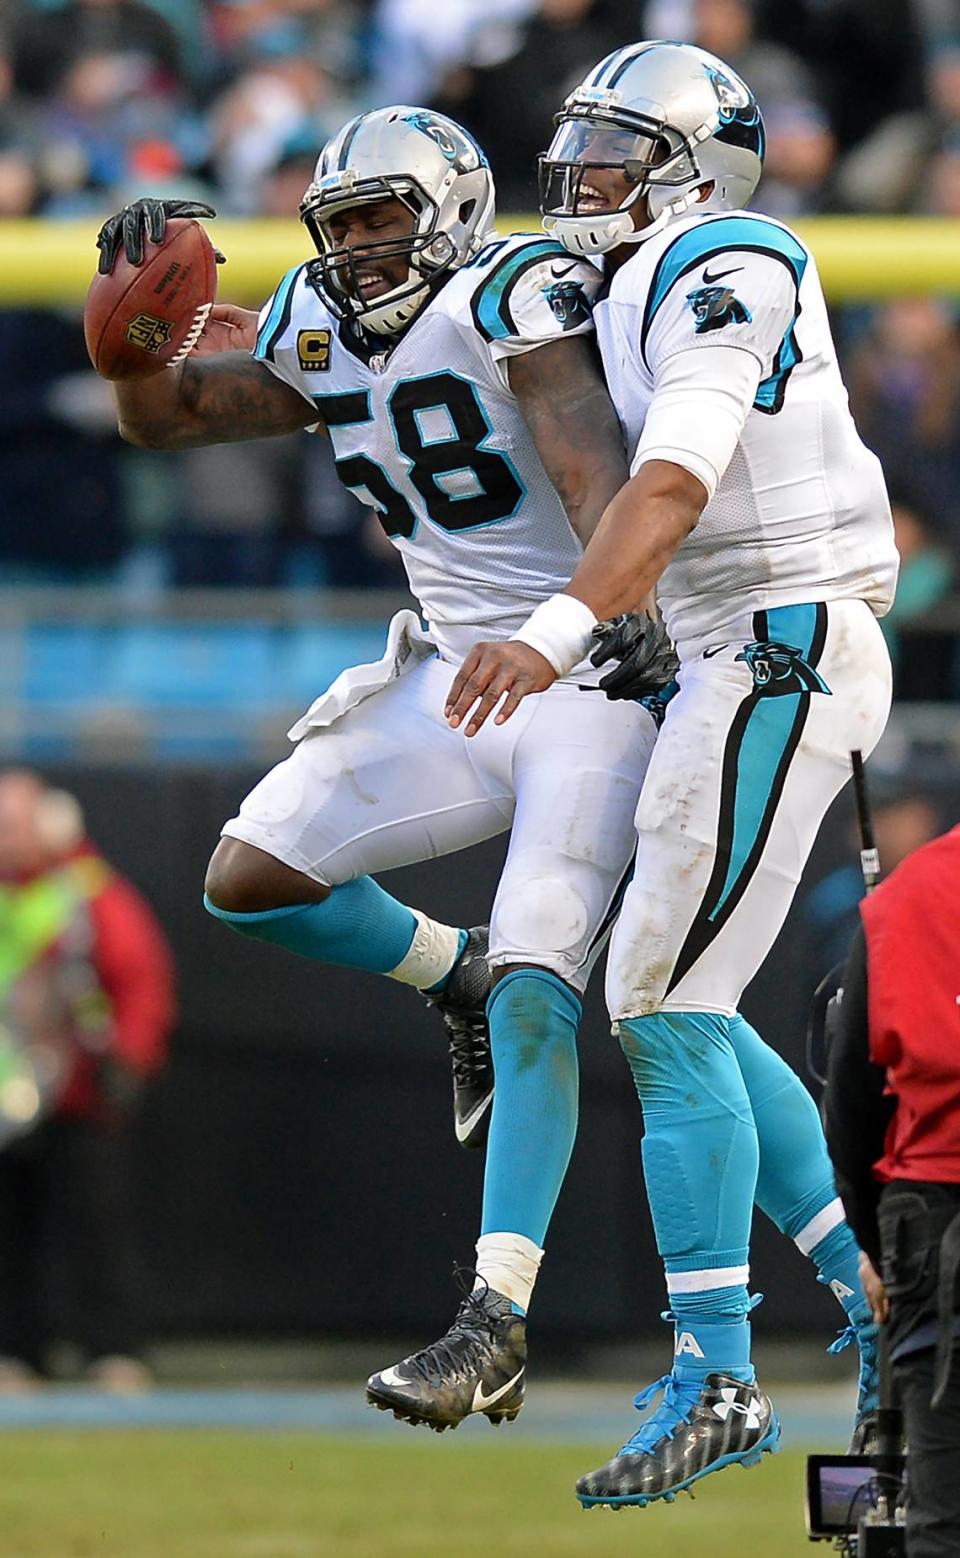 Carolina Panthers linebacker Thomas Davis, left, and quarterback Cam Newton celebrate Davis’s recovery of an onside kick against Seattle. The two were fierce rivals in practice. “If I won a rep against him or if we won a rep against them, I’m letting him hear about it. I’m letting him know every single time and vice versa,” Davis said of Newton. Jeff Siner/jsiner@charlotteobserver.com